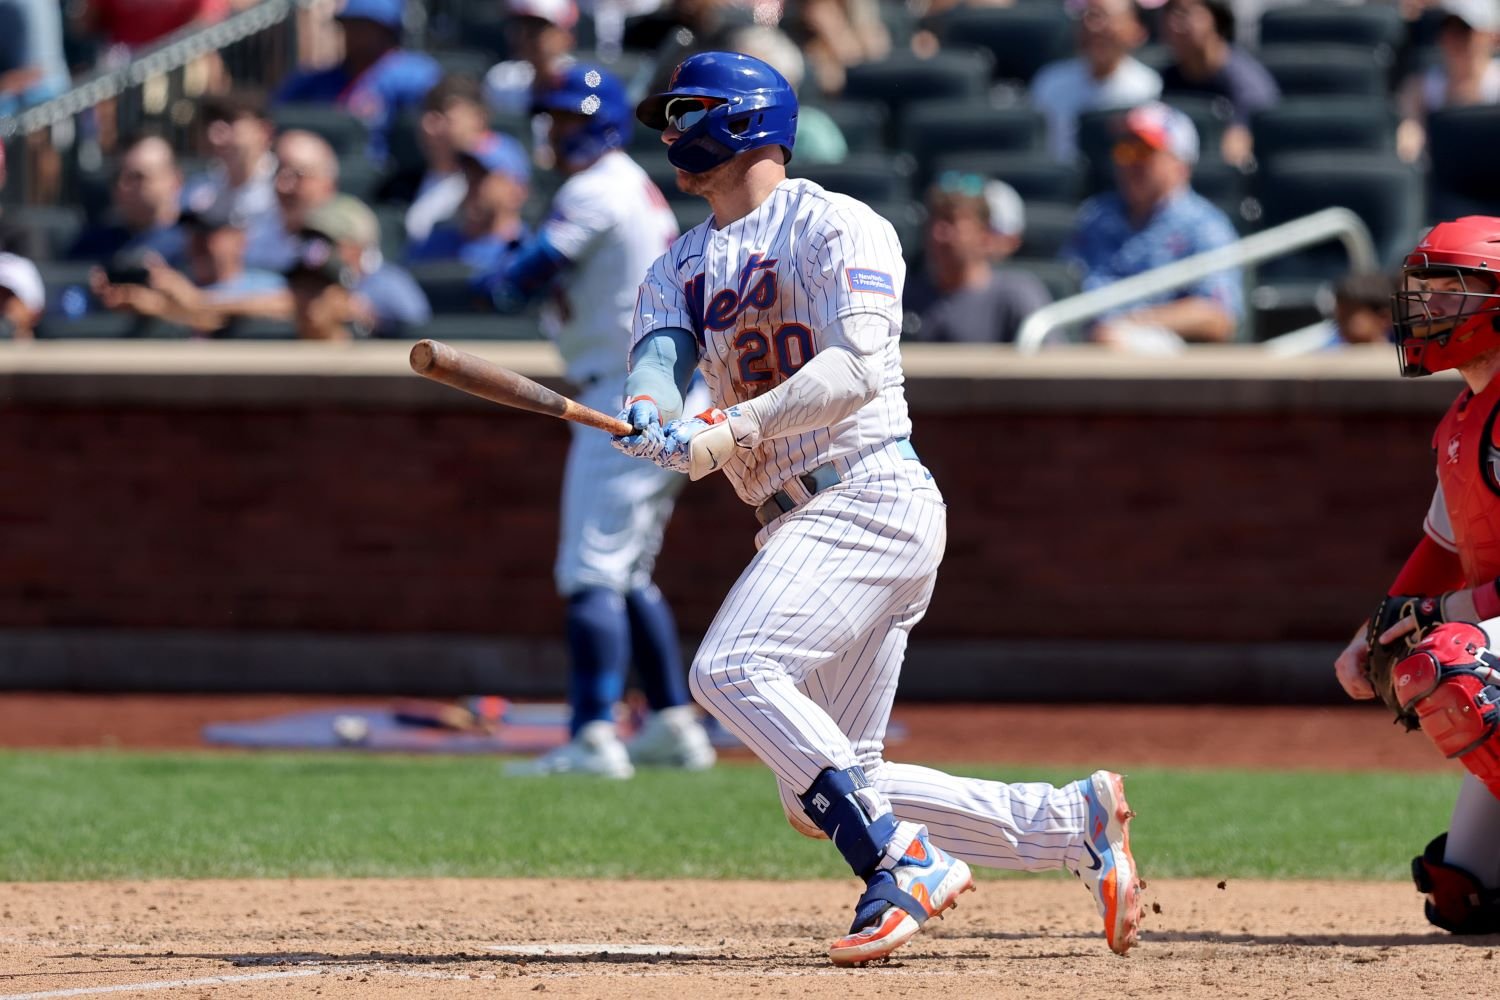 Pete Alonso: Breaking News, Rumors & Highlights